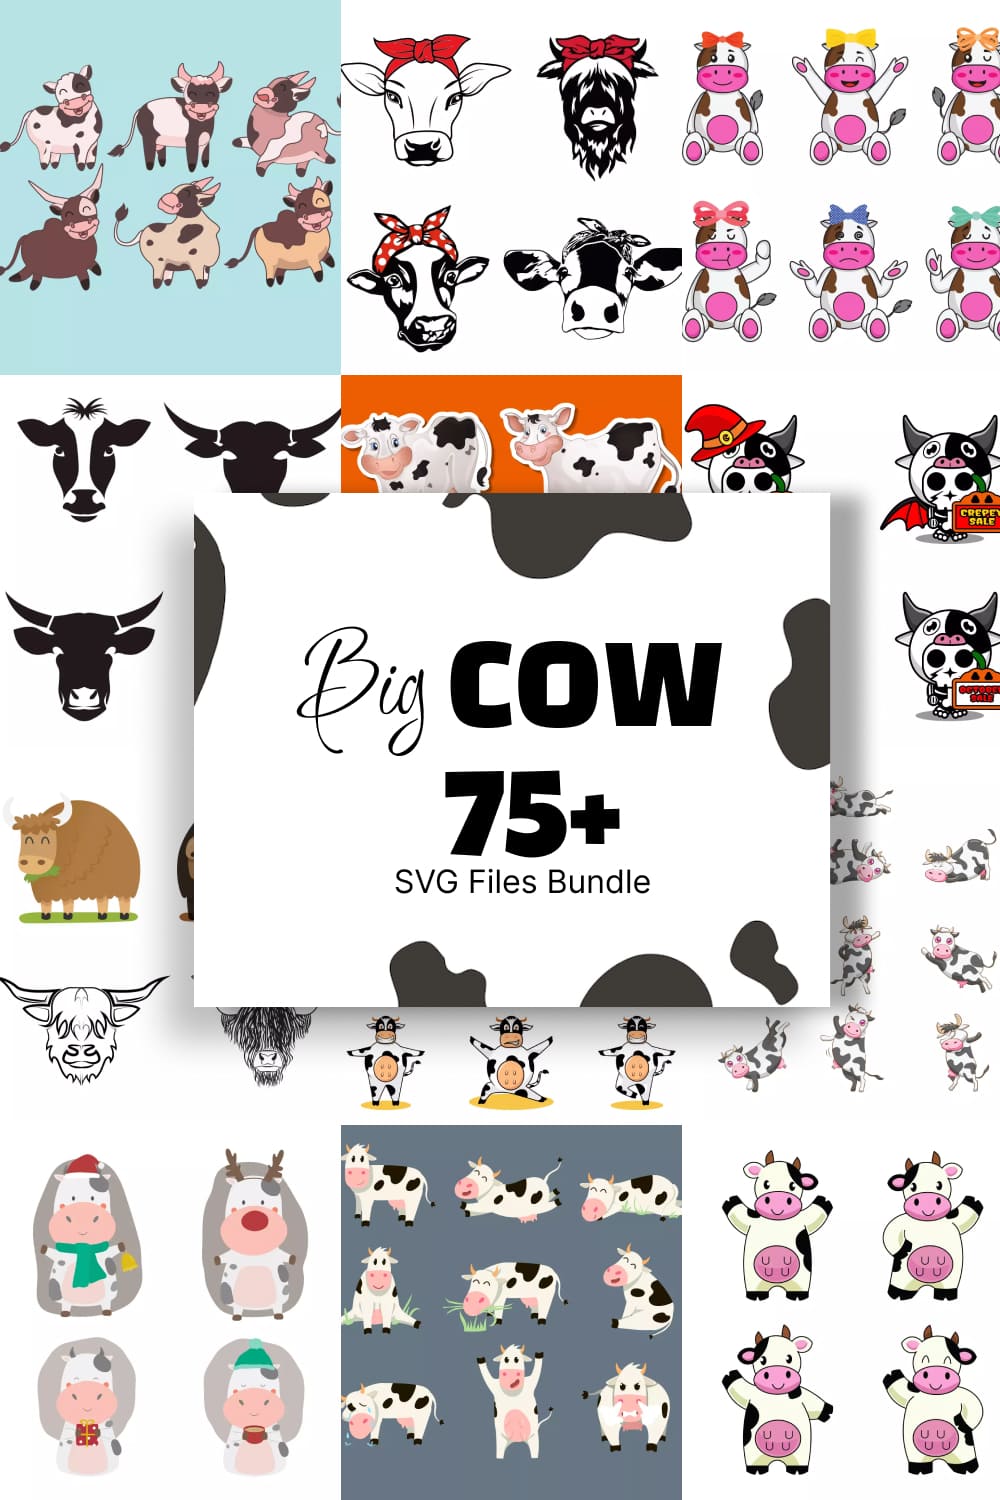 Large collection of cow stickers and decals.